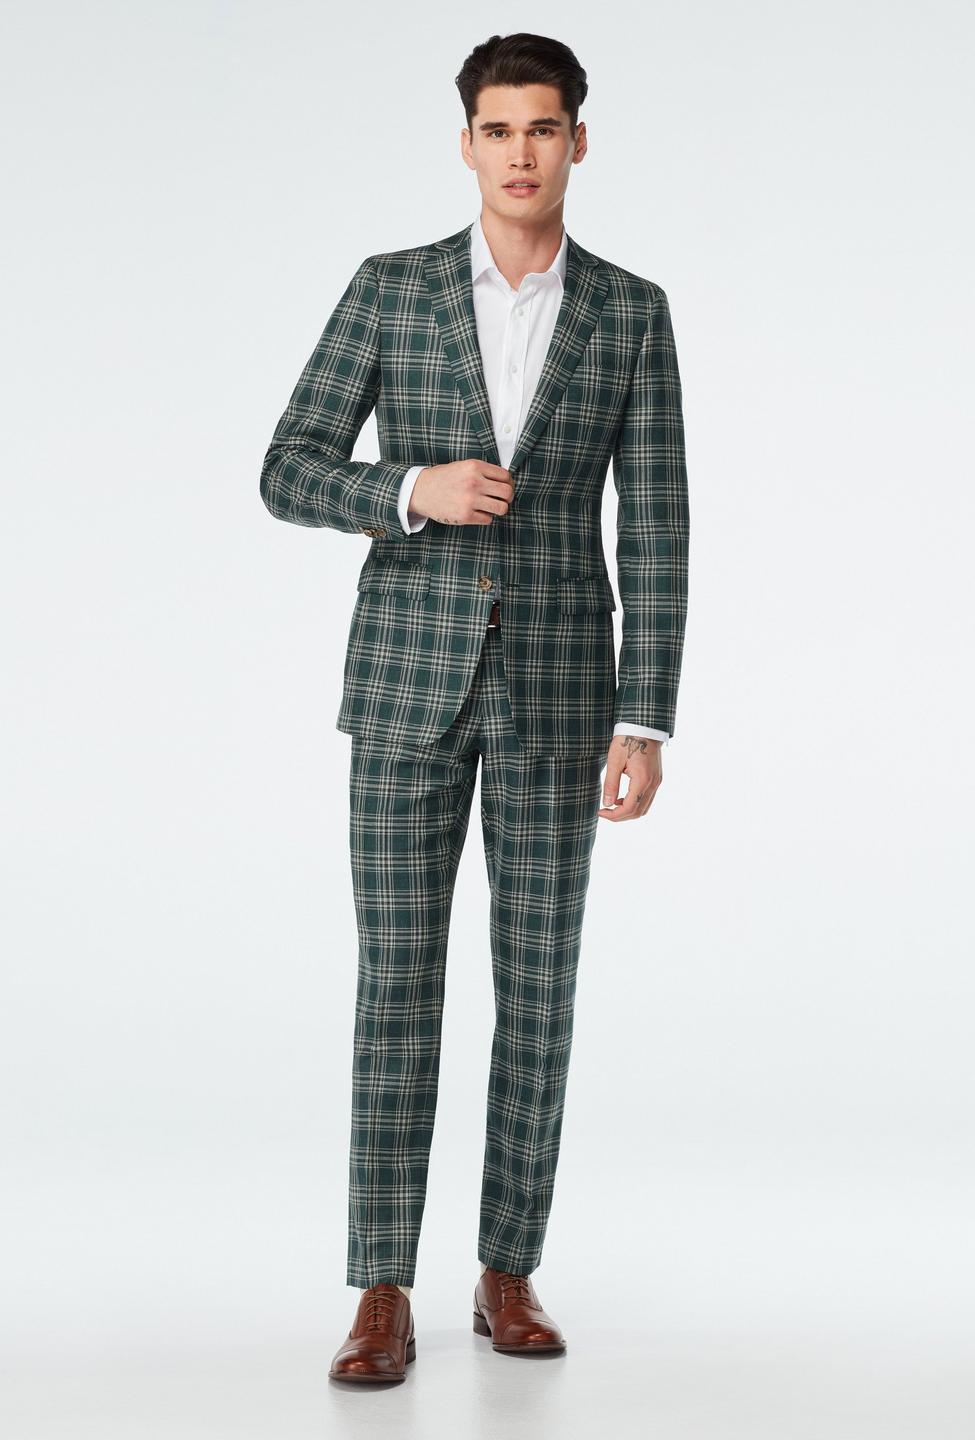 Green suit - Stone Plaid Design from Seasonal Indochino Collection